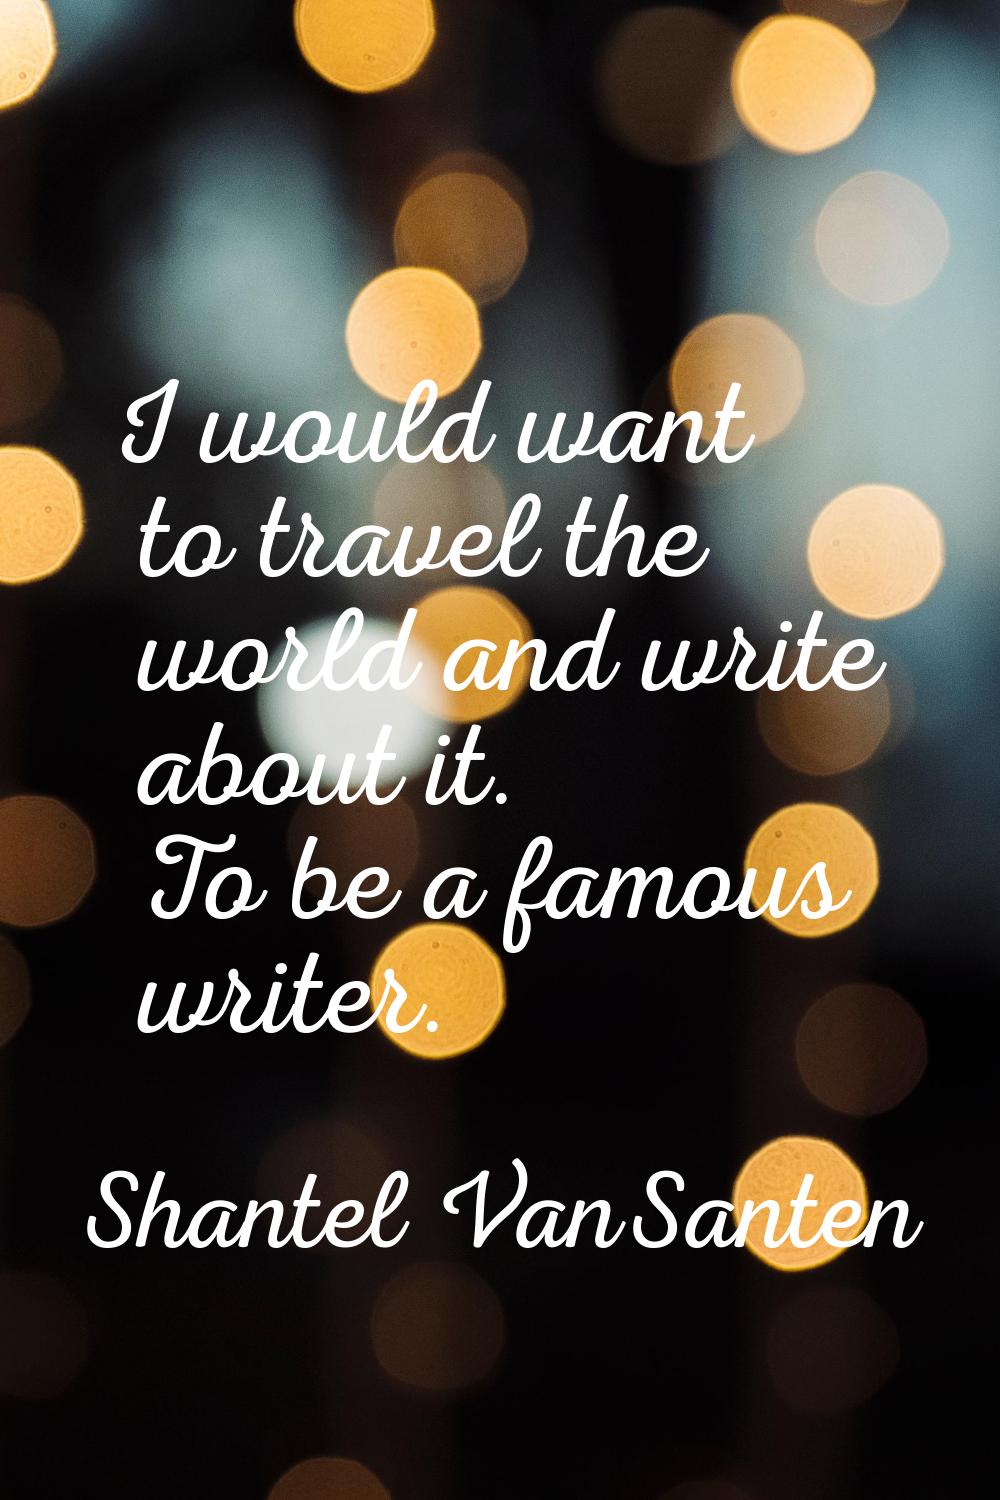 I would want to travel the world and write about it. To be a famous writer.